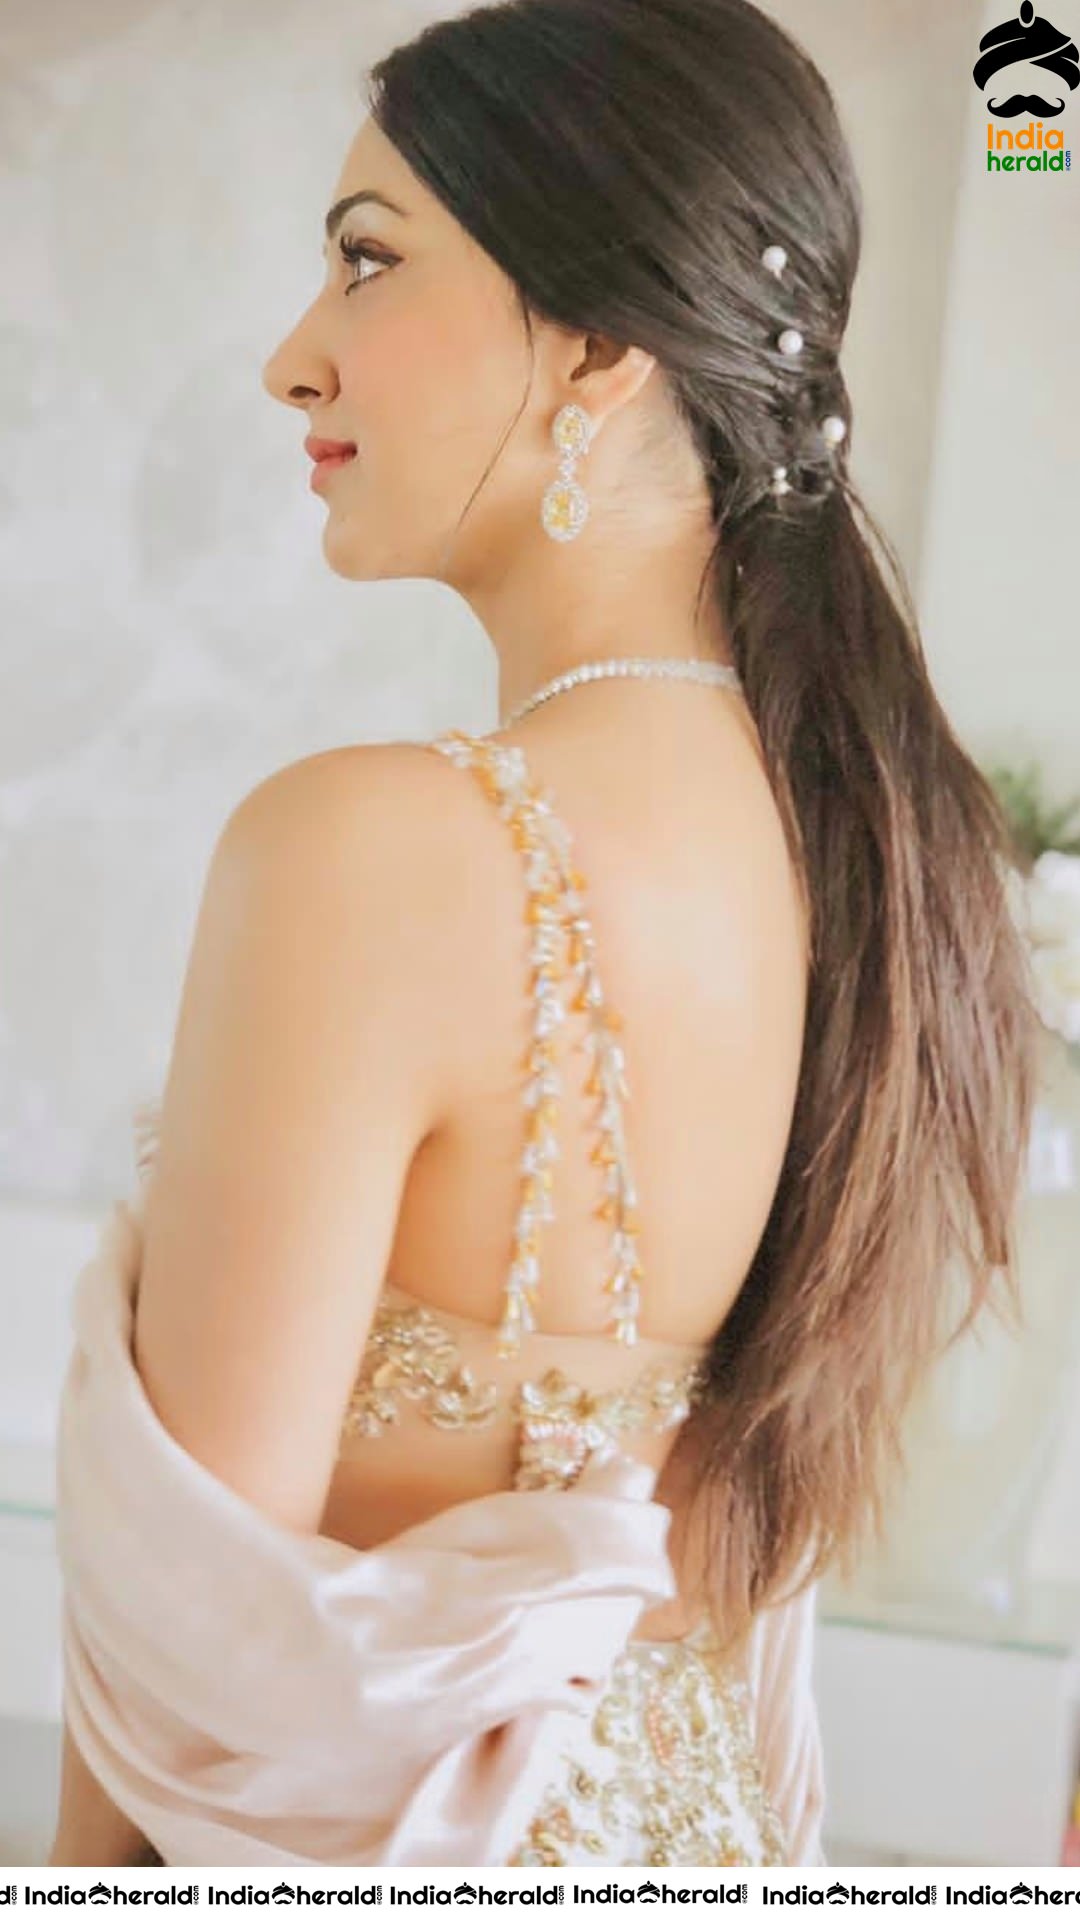 Kiara Advani Shows Her Fleshy Belly And Sexy Assets At A Wedding Set 2